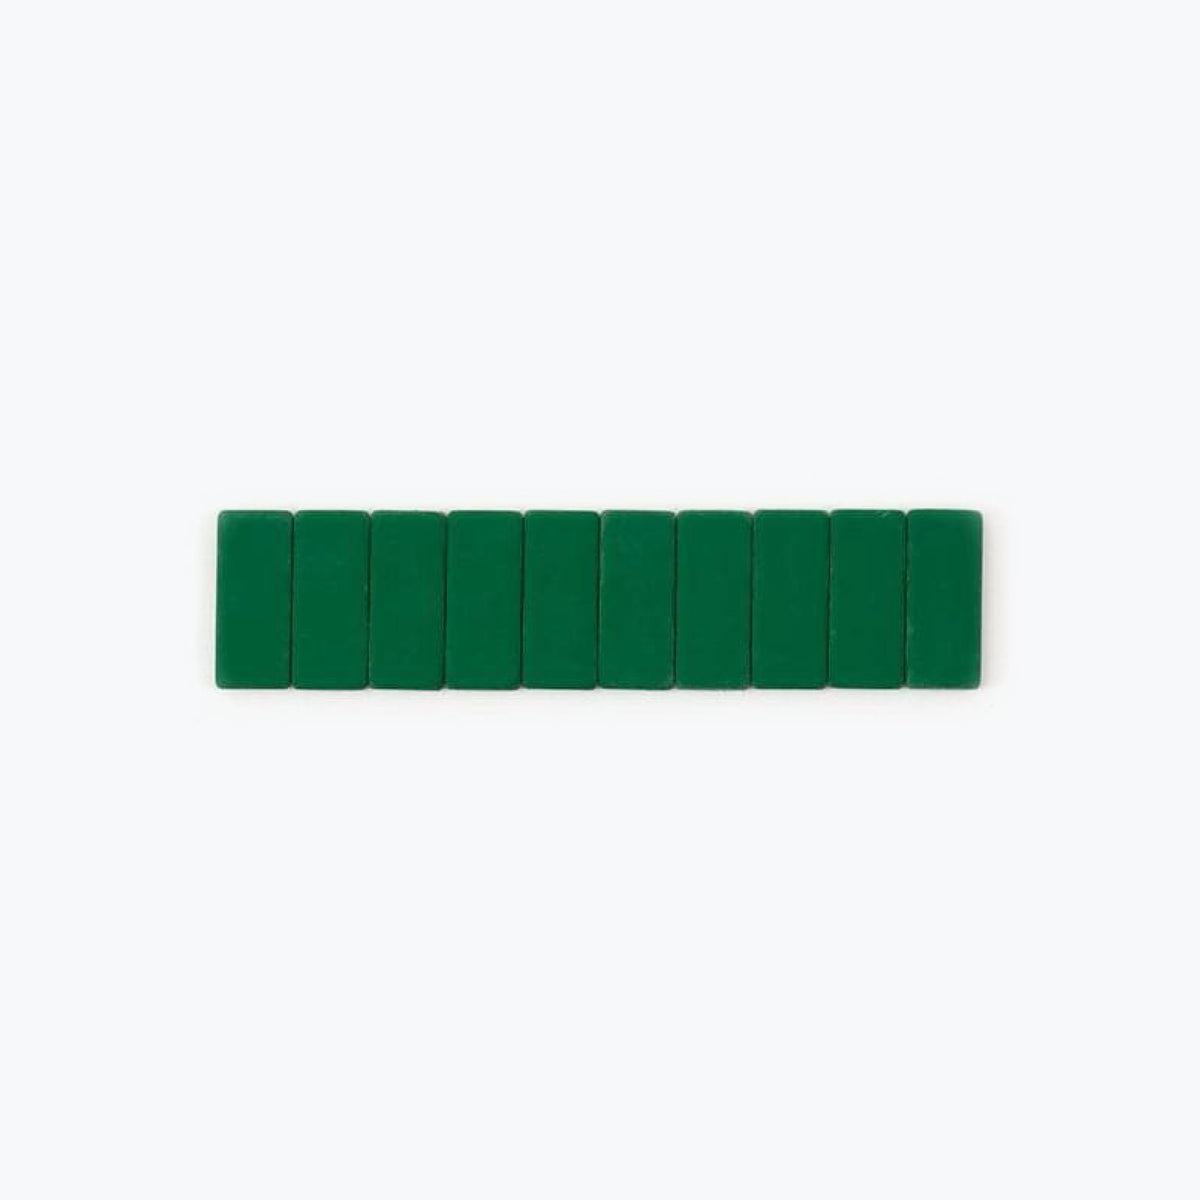 Palomino Blackwing - Replacement Erasers - 10 Pack - Green